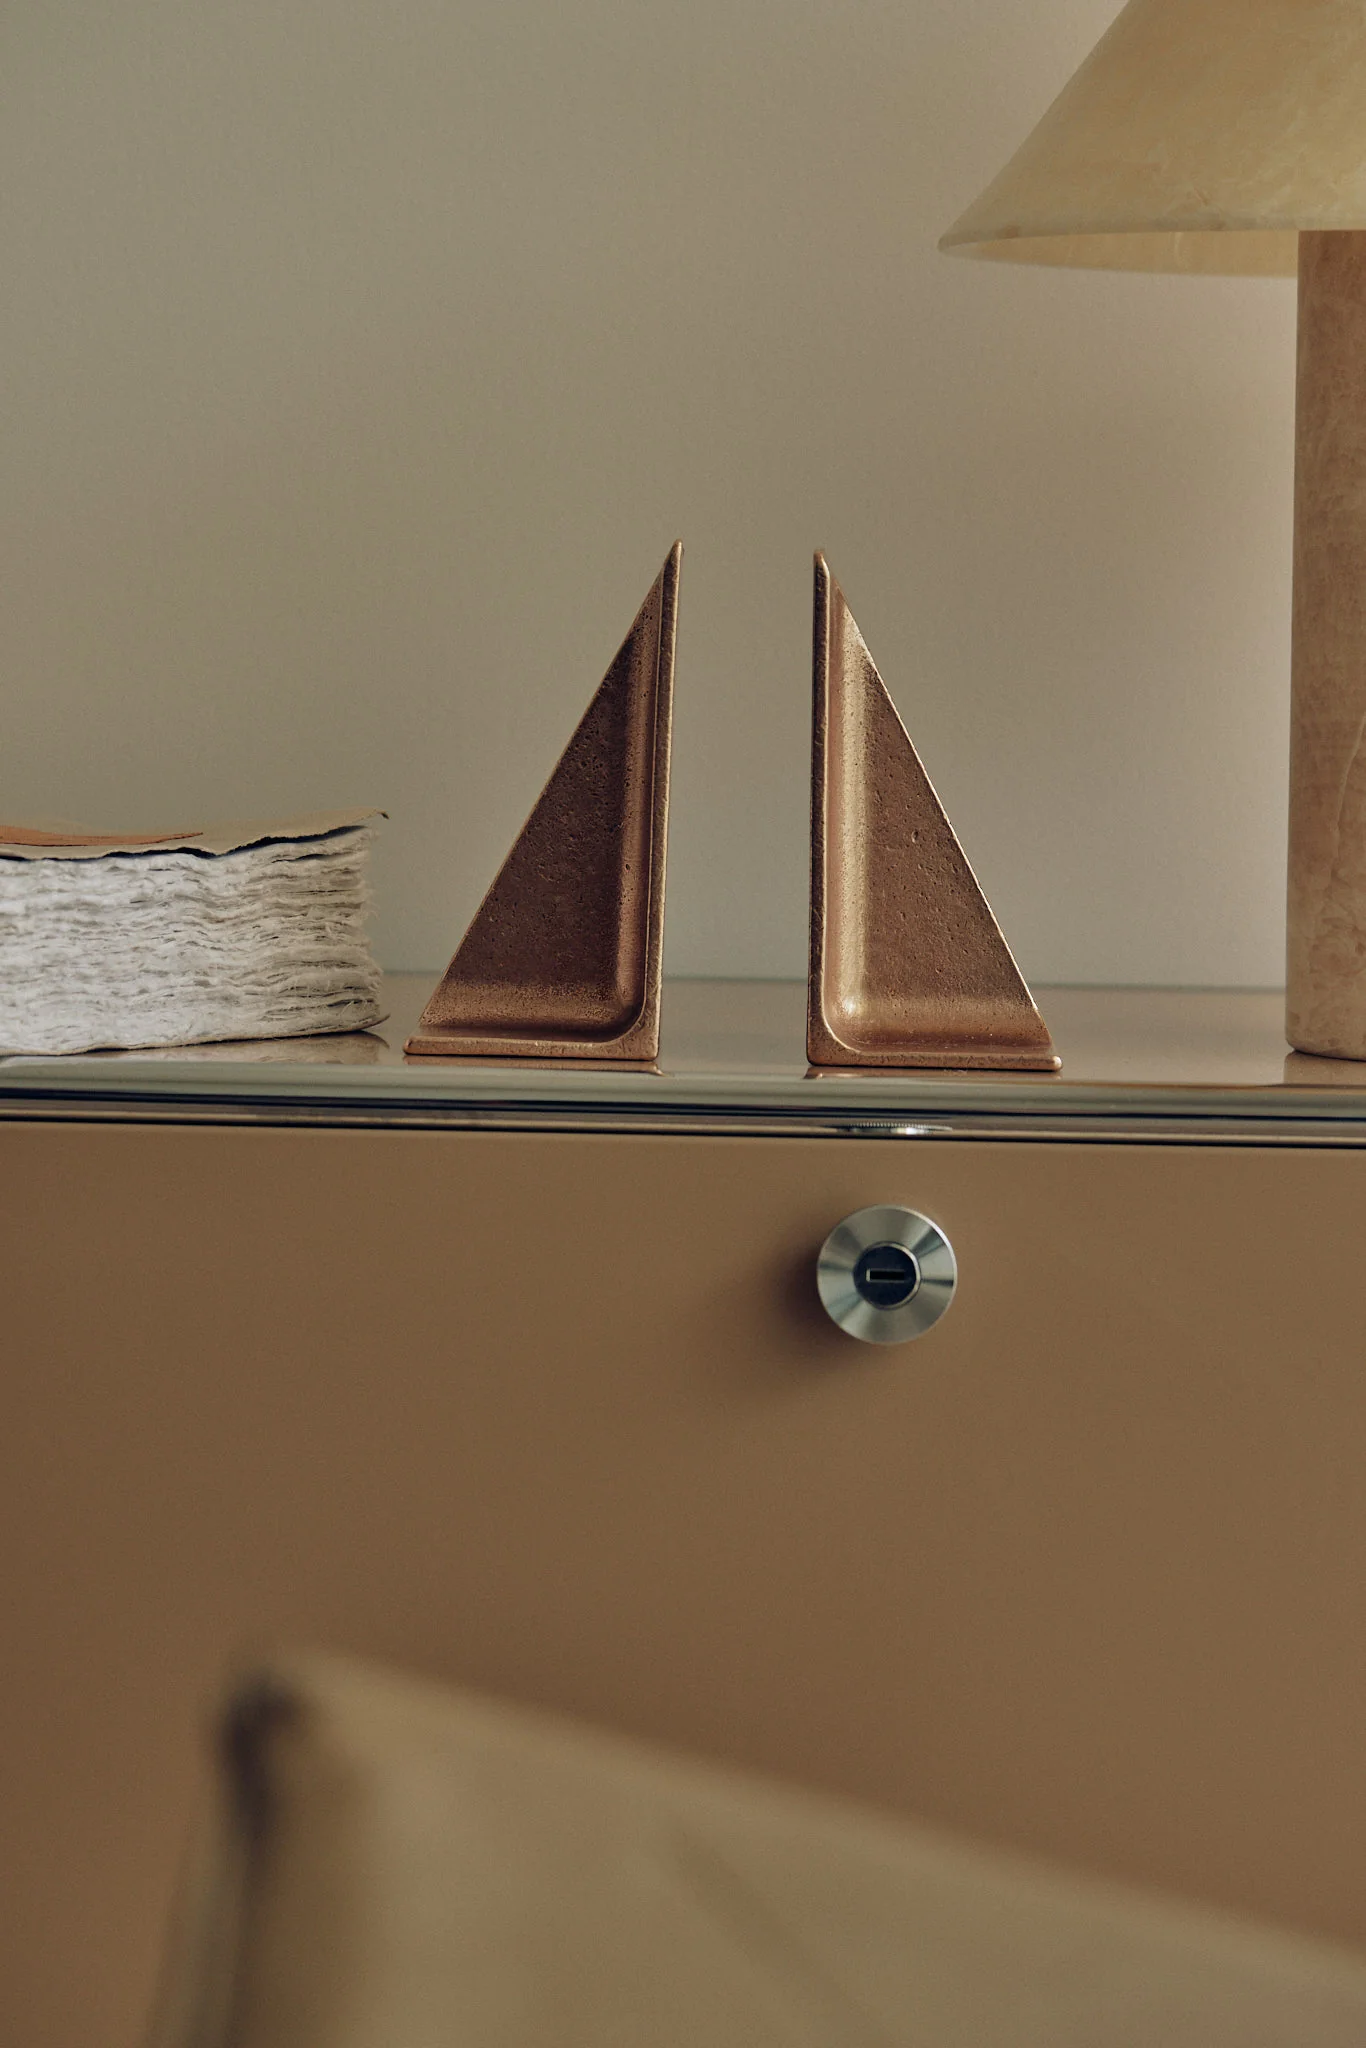 a pair of sail boats on top of a dresser